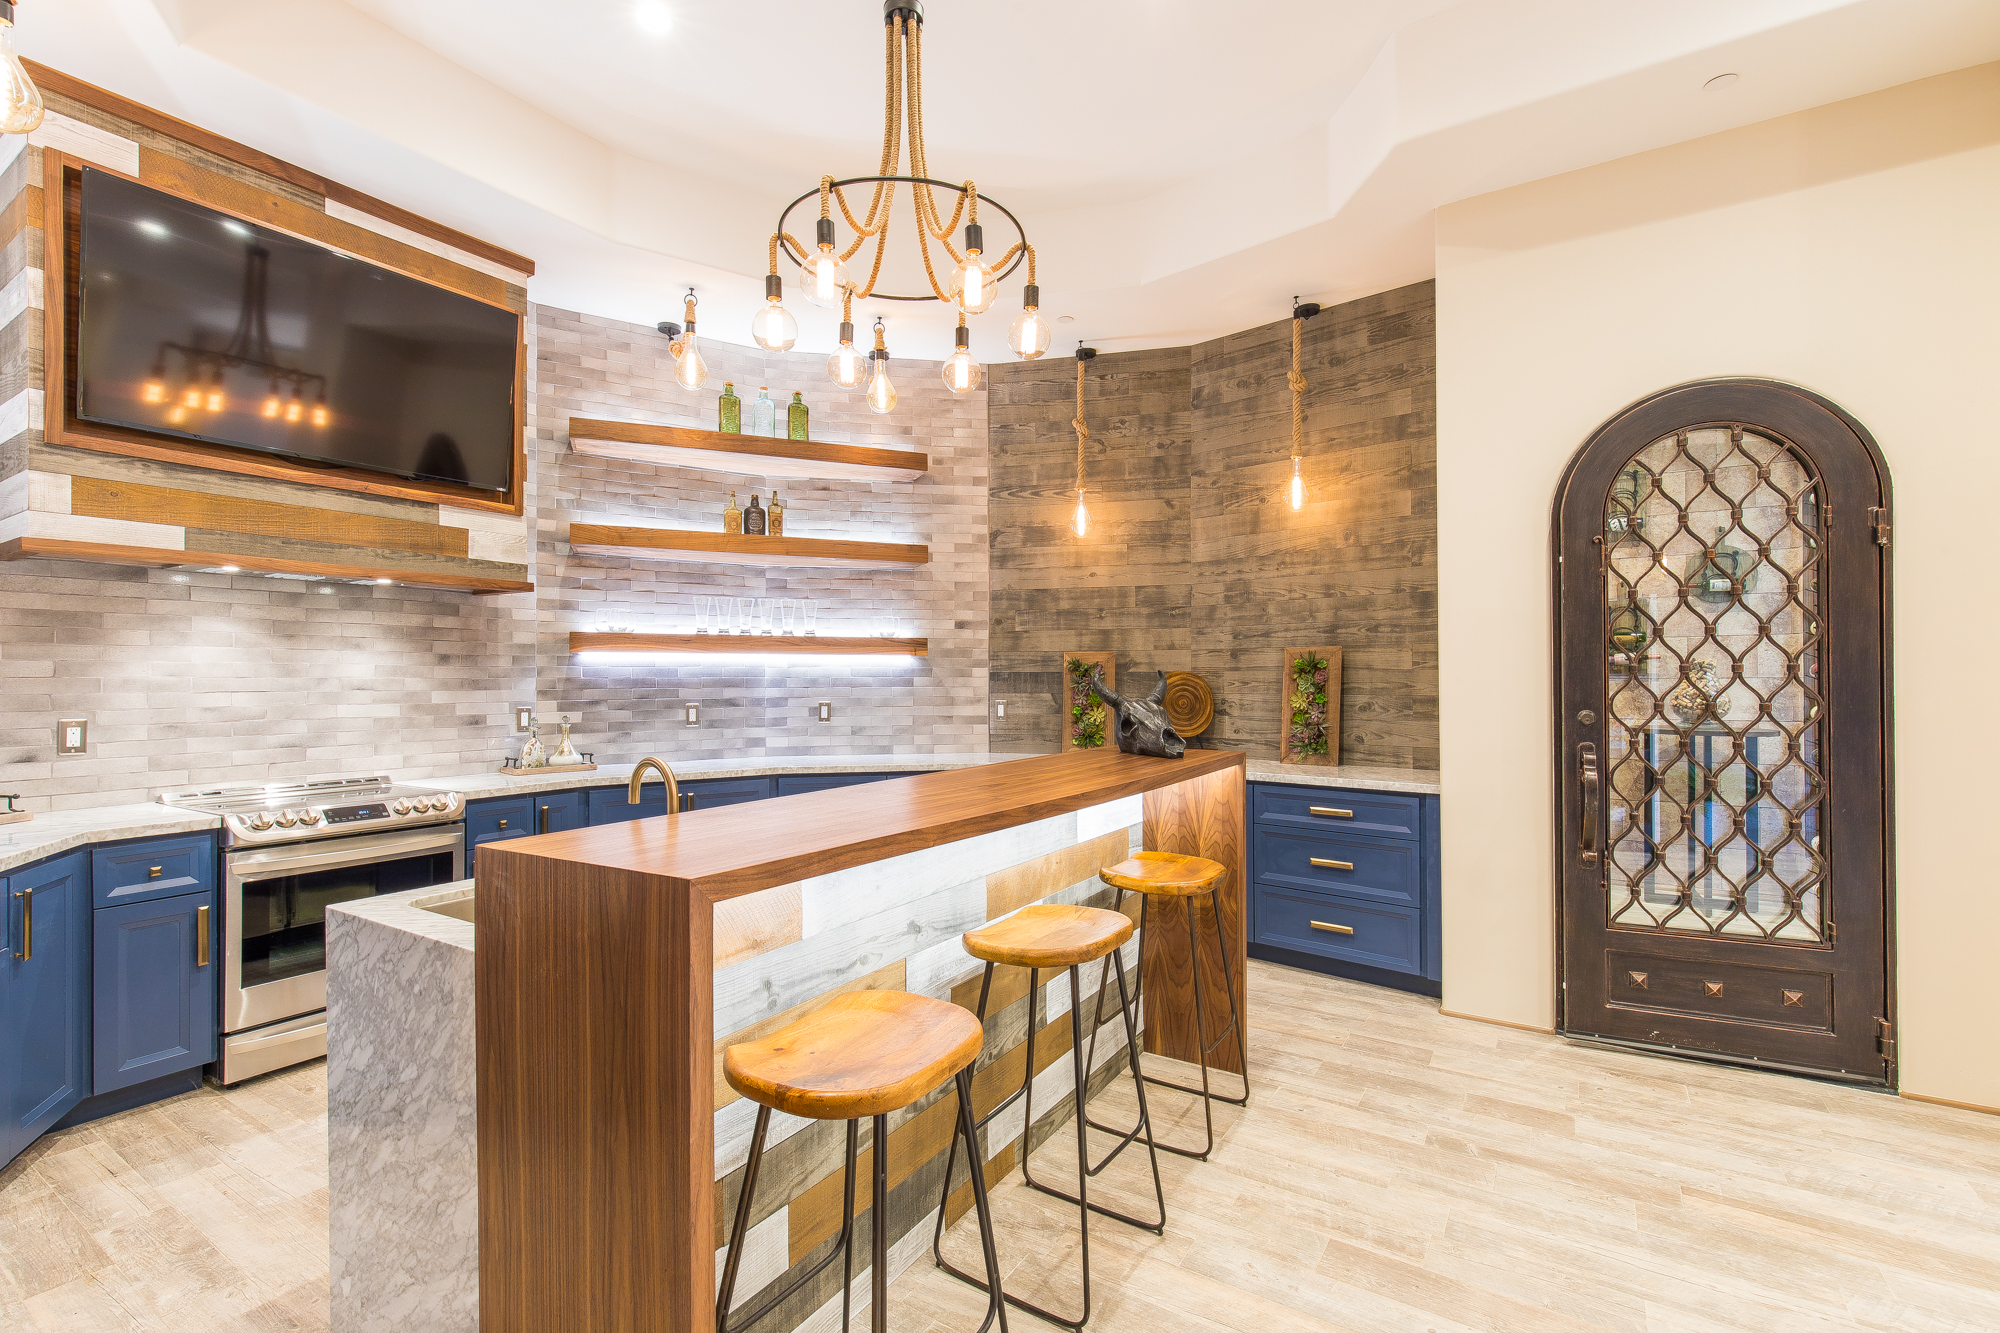  The lower level kitchen and bar consists of custom made painted cabinetry comprised of all American plywood and hardwood with top of the line soft close Blum hardware, stainless steel appliances, and appliance lift and floating shelves made of walnu